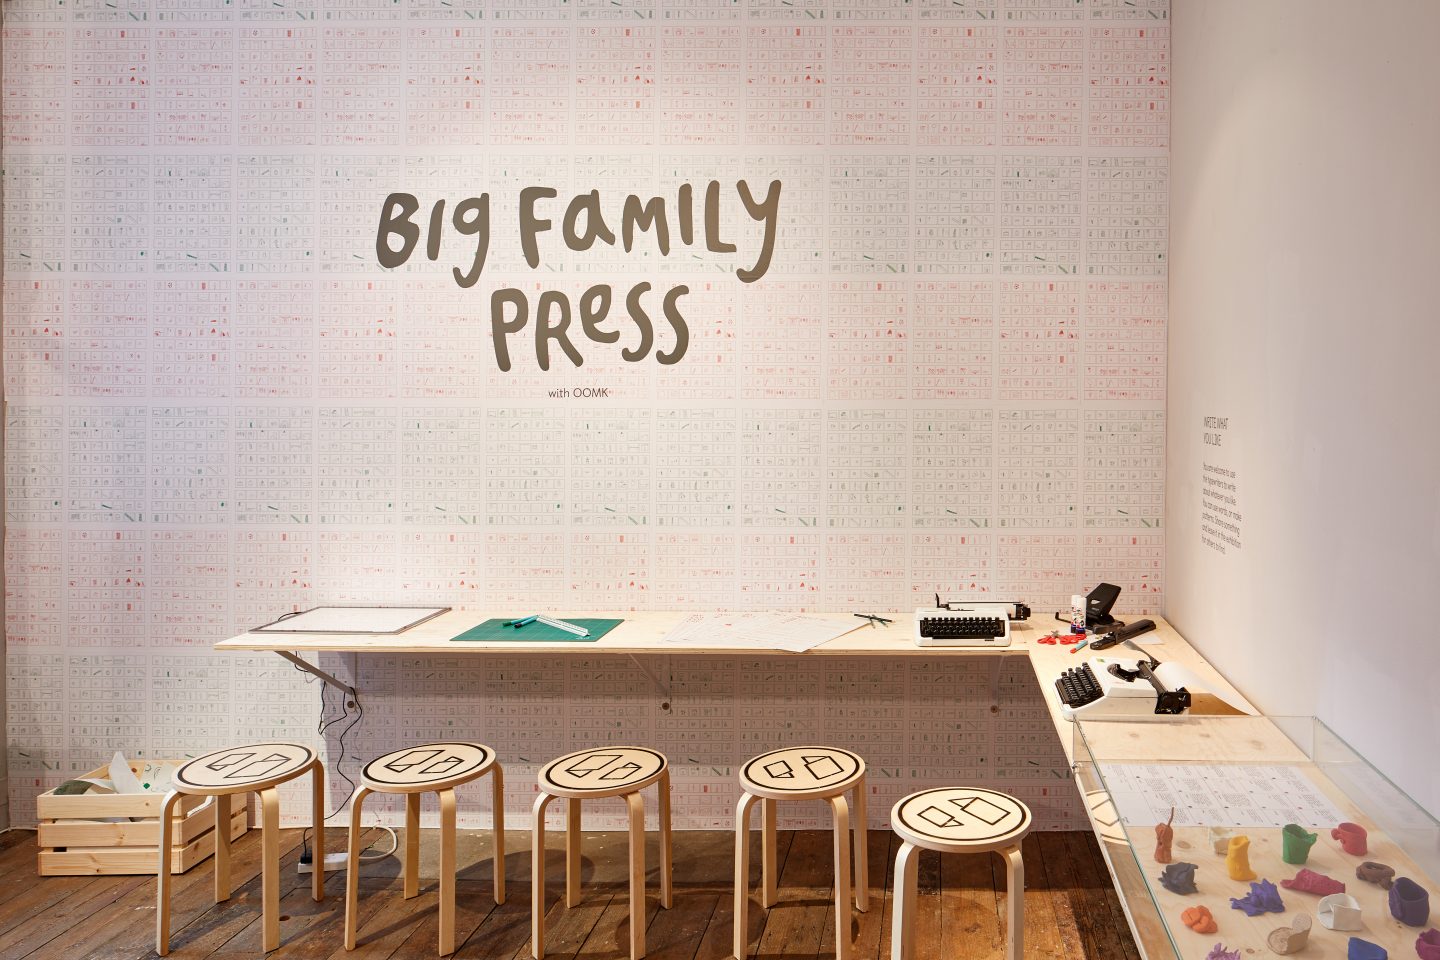 Big Family Press with OOMK, South London Gallery, 2018. Photo: Andy Stagg
